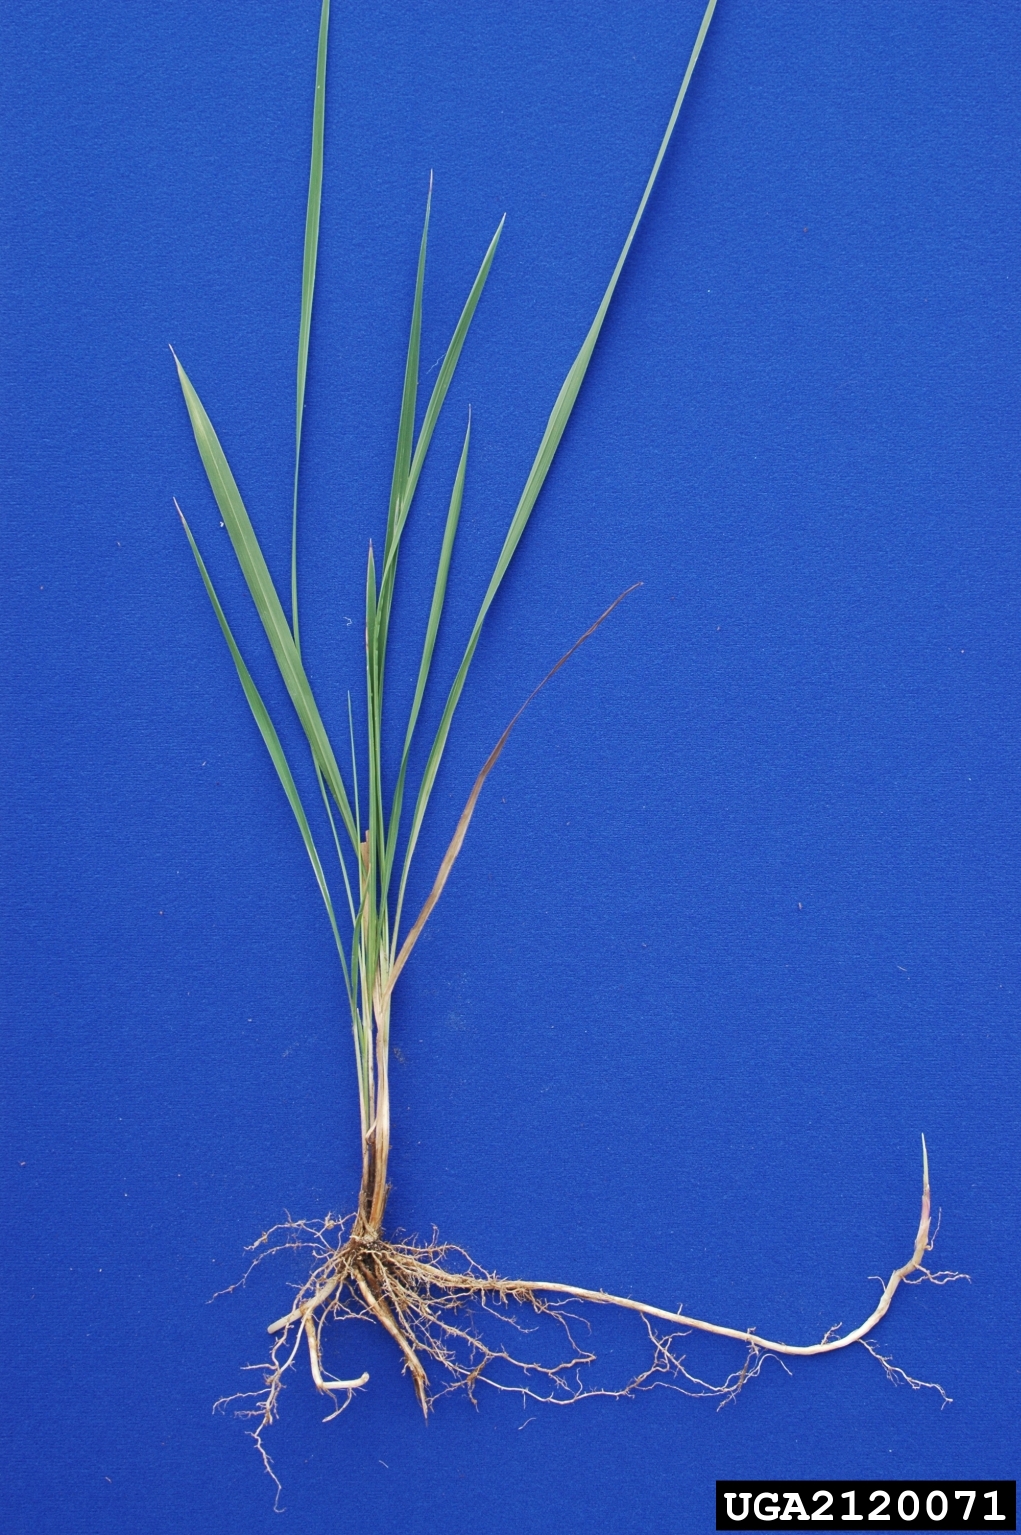 Photograph of a singule cogongrass plant against a blue background. Both root and shoot systems are shown, including a long rhizome extending horizontally from the base of the plant and to the right, where it curves upward.